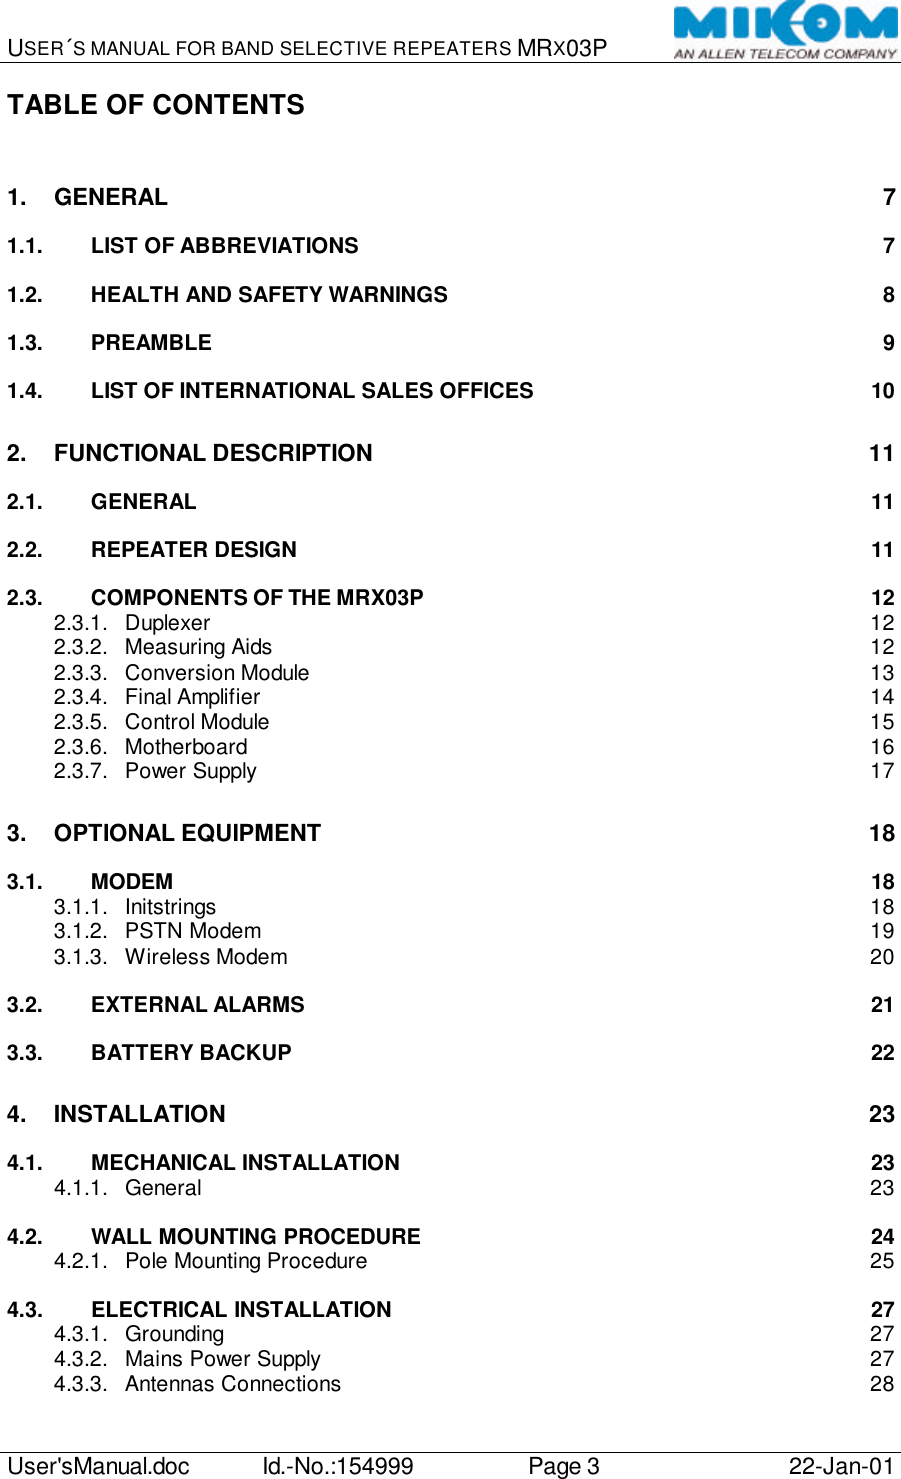 USER´S MANUAL FOR BAND SELECTIVE REPEATERS MRX03P   User&apos;sManual.doc Id.-No.:154999 Page 3 22-Jan-01  TABLE OF CONTENTS  1. GENERAL 7 1.1. LIST OF ABBREVIATIONS 7 1.2. HEALTH AND SAFETY WARNINGS 8 1.3. PREAMBLE 9 1.4. LIST OF INTERNATIONAL SALES OFFICES 10 2. FUNCTIONAL DESCRIPTION 11 2.1. GENERAL 11 2.2. REPEATER DESIGN 11 2.3. COMPONENTS OF THE MRX03P 12 2.3.1. Duplexer 12 2.3.2. Measuring Aids 12 2.3.3. Conversion Module 13 2.3.4. Final Amplifier 14 2.3.5. Control Module 15 2.3.6. Motherboard 16 2.3.7. Power Supply 17 3. OPTIONAL EQUIPMENT 18 3.1. MODEM 18 3.1.1. Initstrings 18 3.1.2. PSTN Modem 19 3.1.3. Wireless Modem 20 3.2. EXTERNAL ALARMS 21 3.3. BATTERY BACKUP 22 4. INSTALLATION 23 4.1. MECHANICAL INSTALLATION 23 4.1.1. General 23 4.2. WALL MOUNTING PROCEDURE 24 4.2.1. Pole Mounting Procedure 25 4.3. ELECTRICAL INSTALLATION 27 4.3.1. Grounding 27 4.3.2. Mains Power Supply 27 4.3.3. Antennas Connections 28 